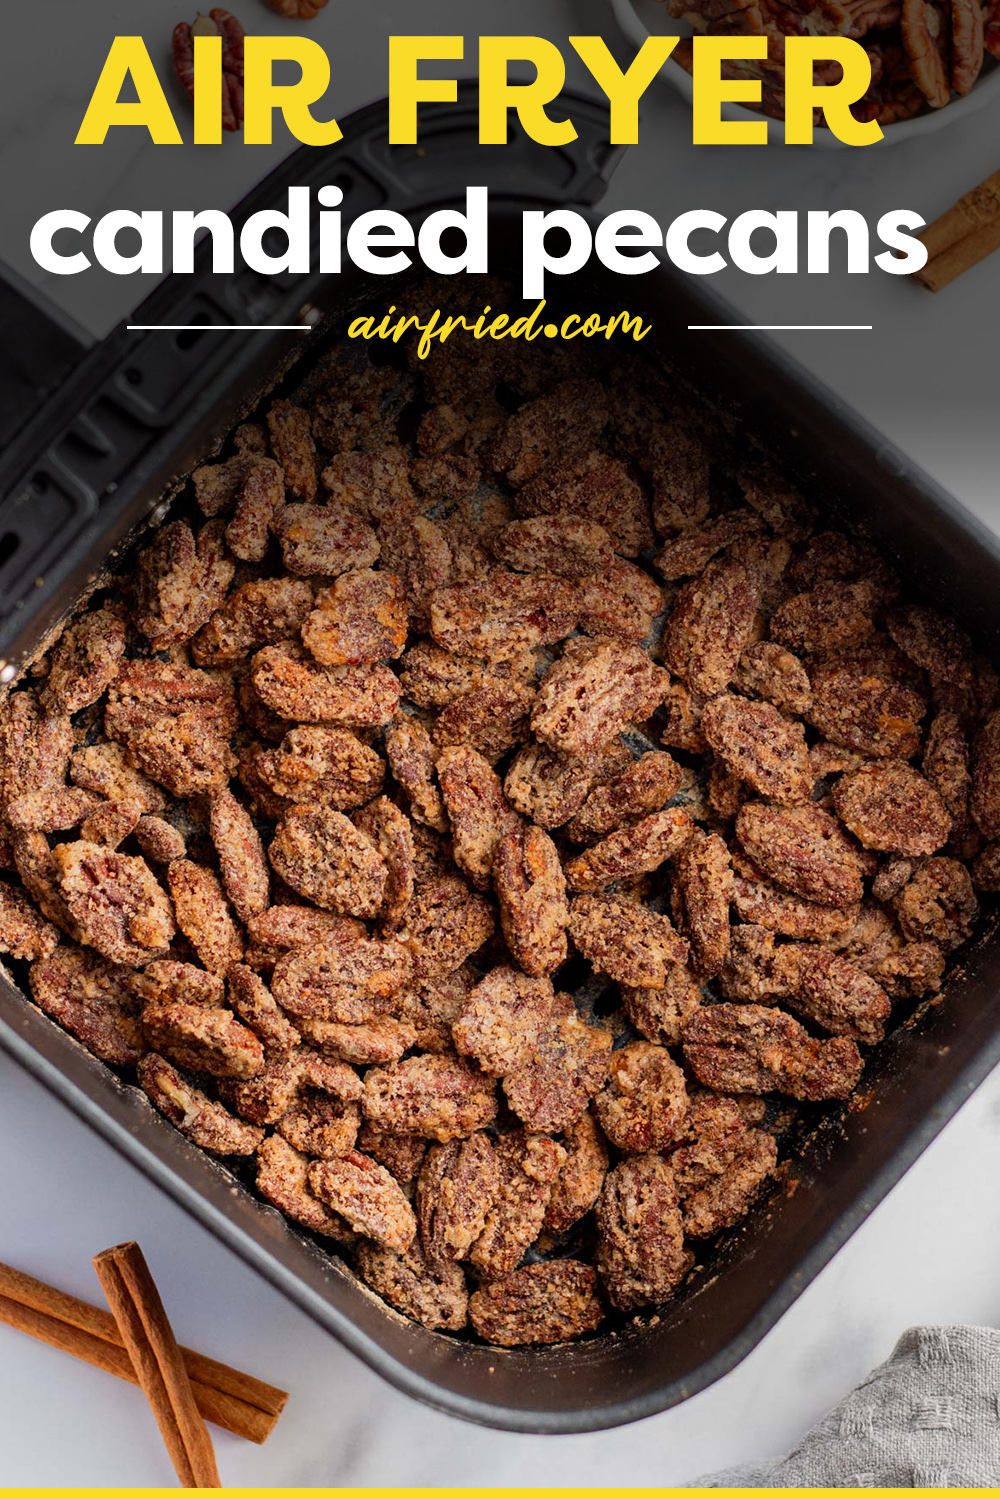 My Air Fryer Candied Pecans recipe is a classic that'll have your kitchen smelling like the holidays with roasted pecans and warm cinnamon! These candied nuts are irresistible and perfect for gifting. 